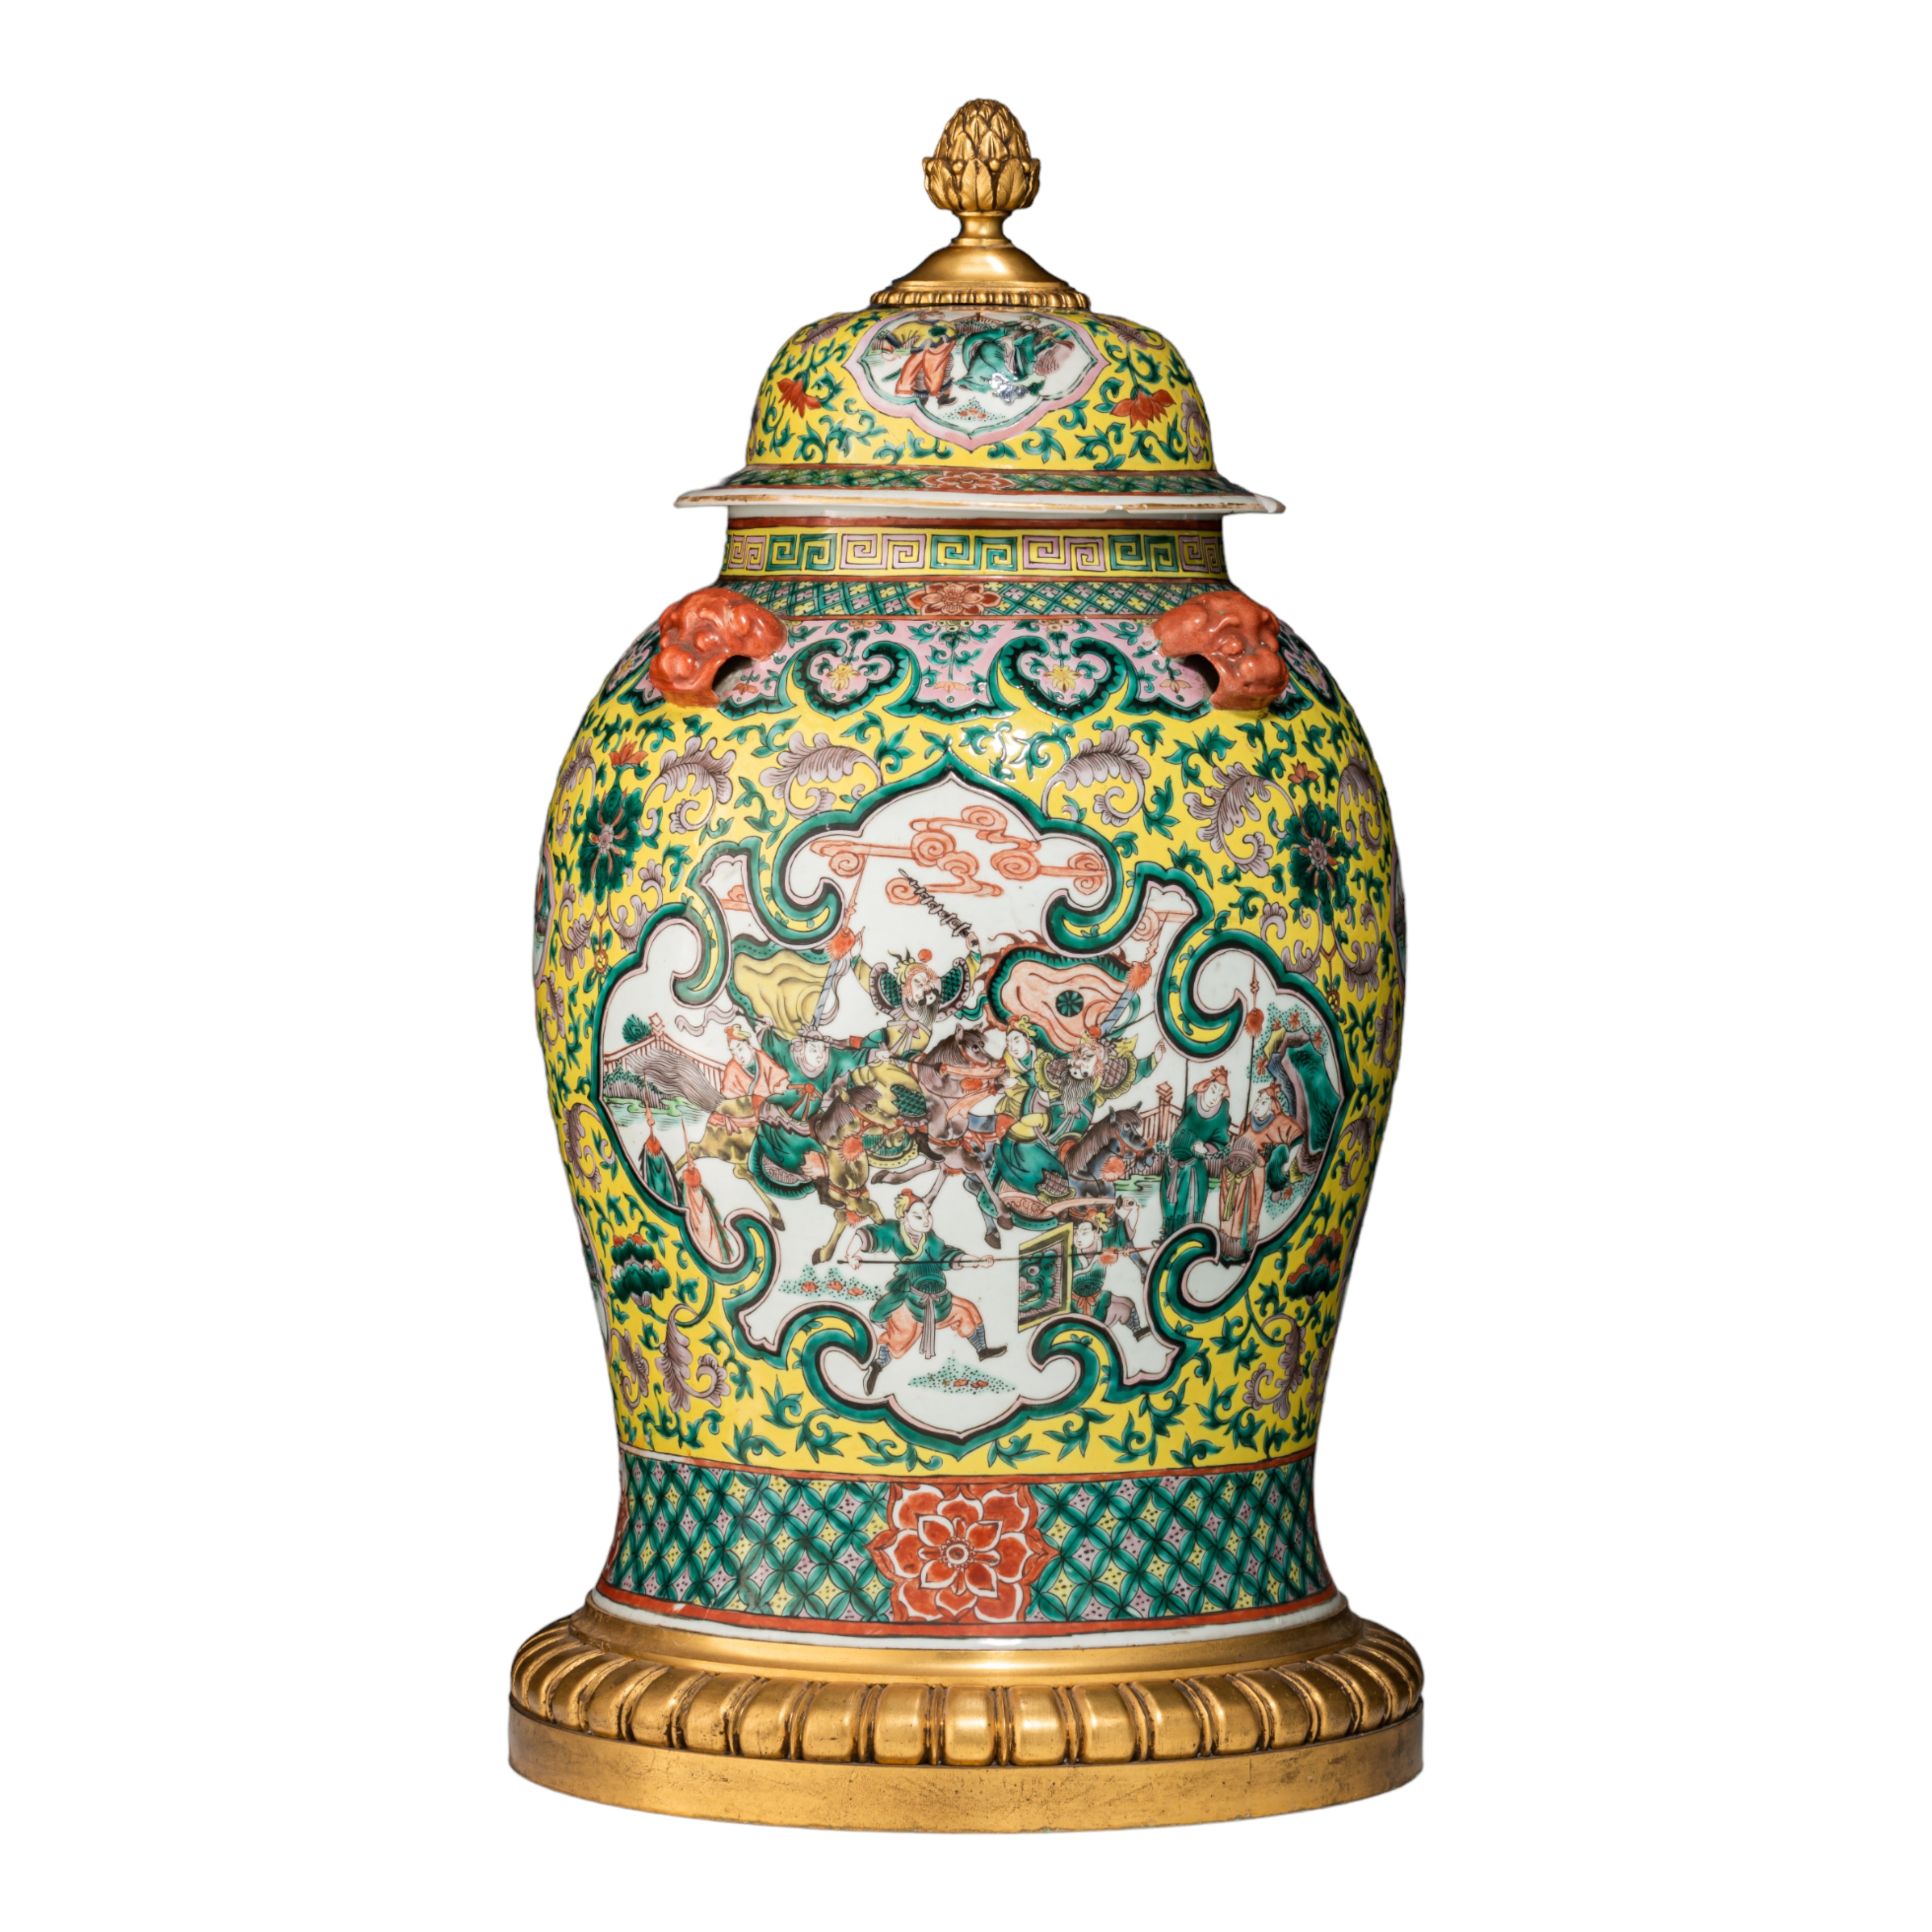 A Chinese famille rose covered vase, 19thC, H 53,5 - Total H 71 cm